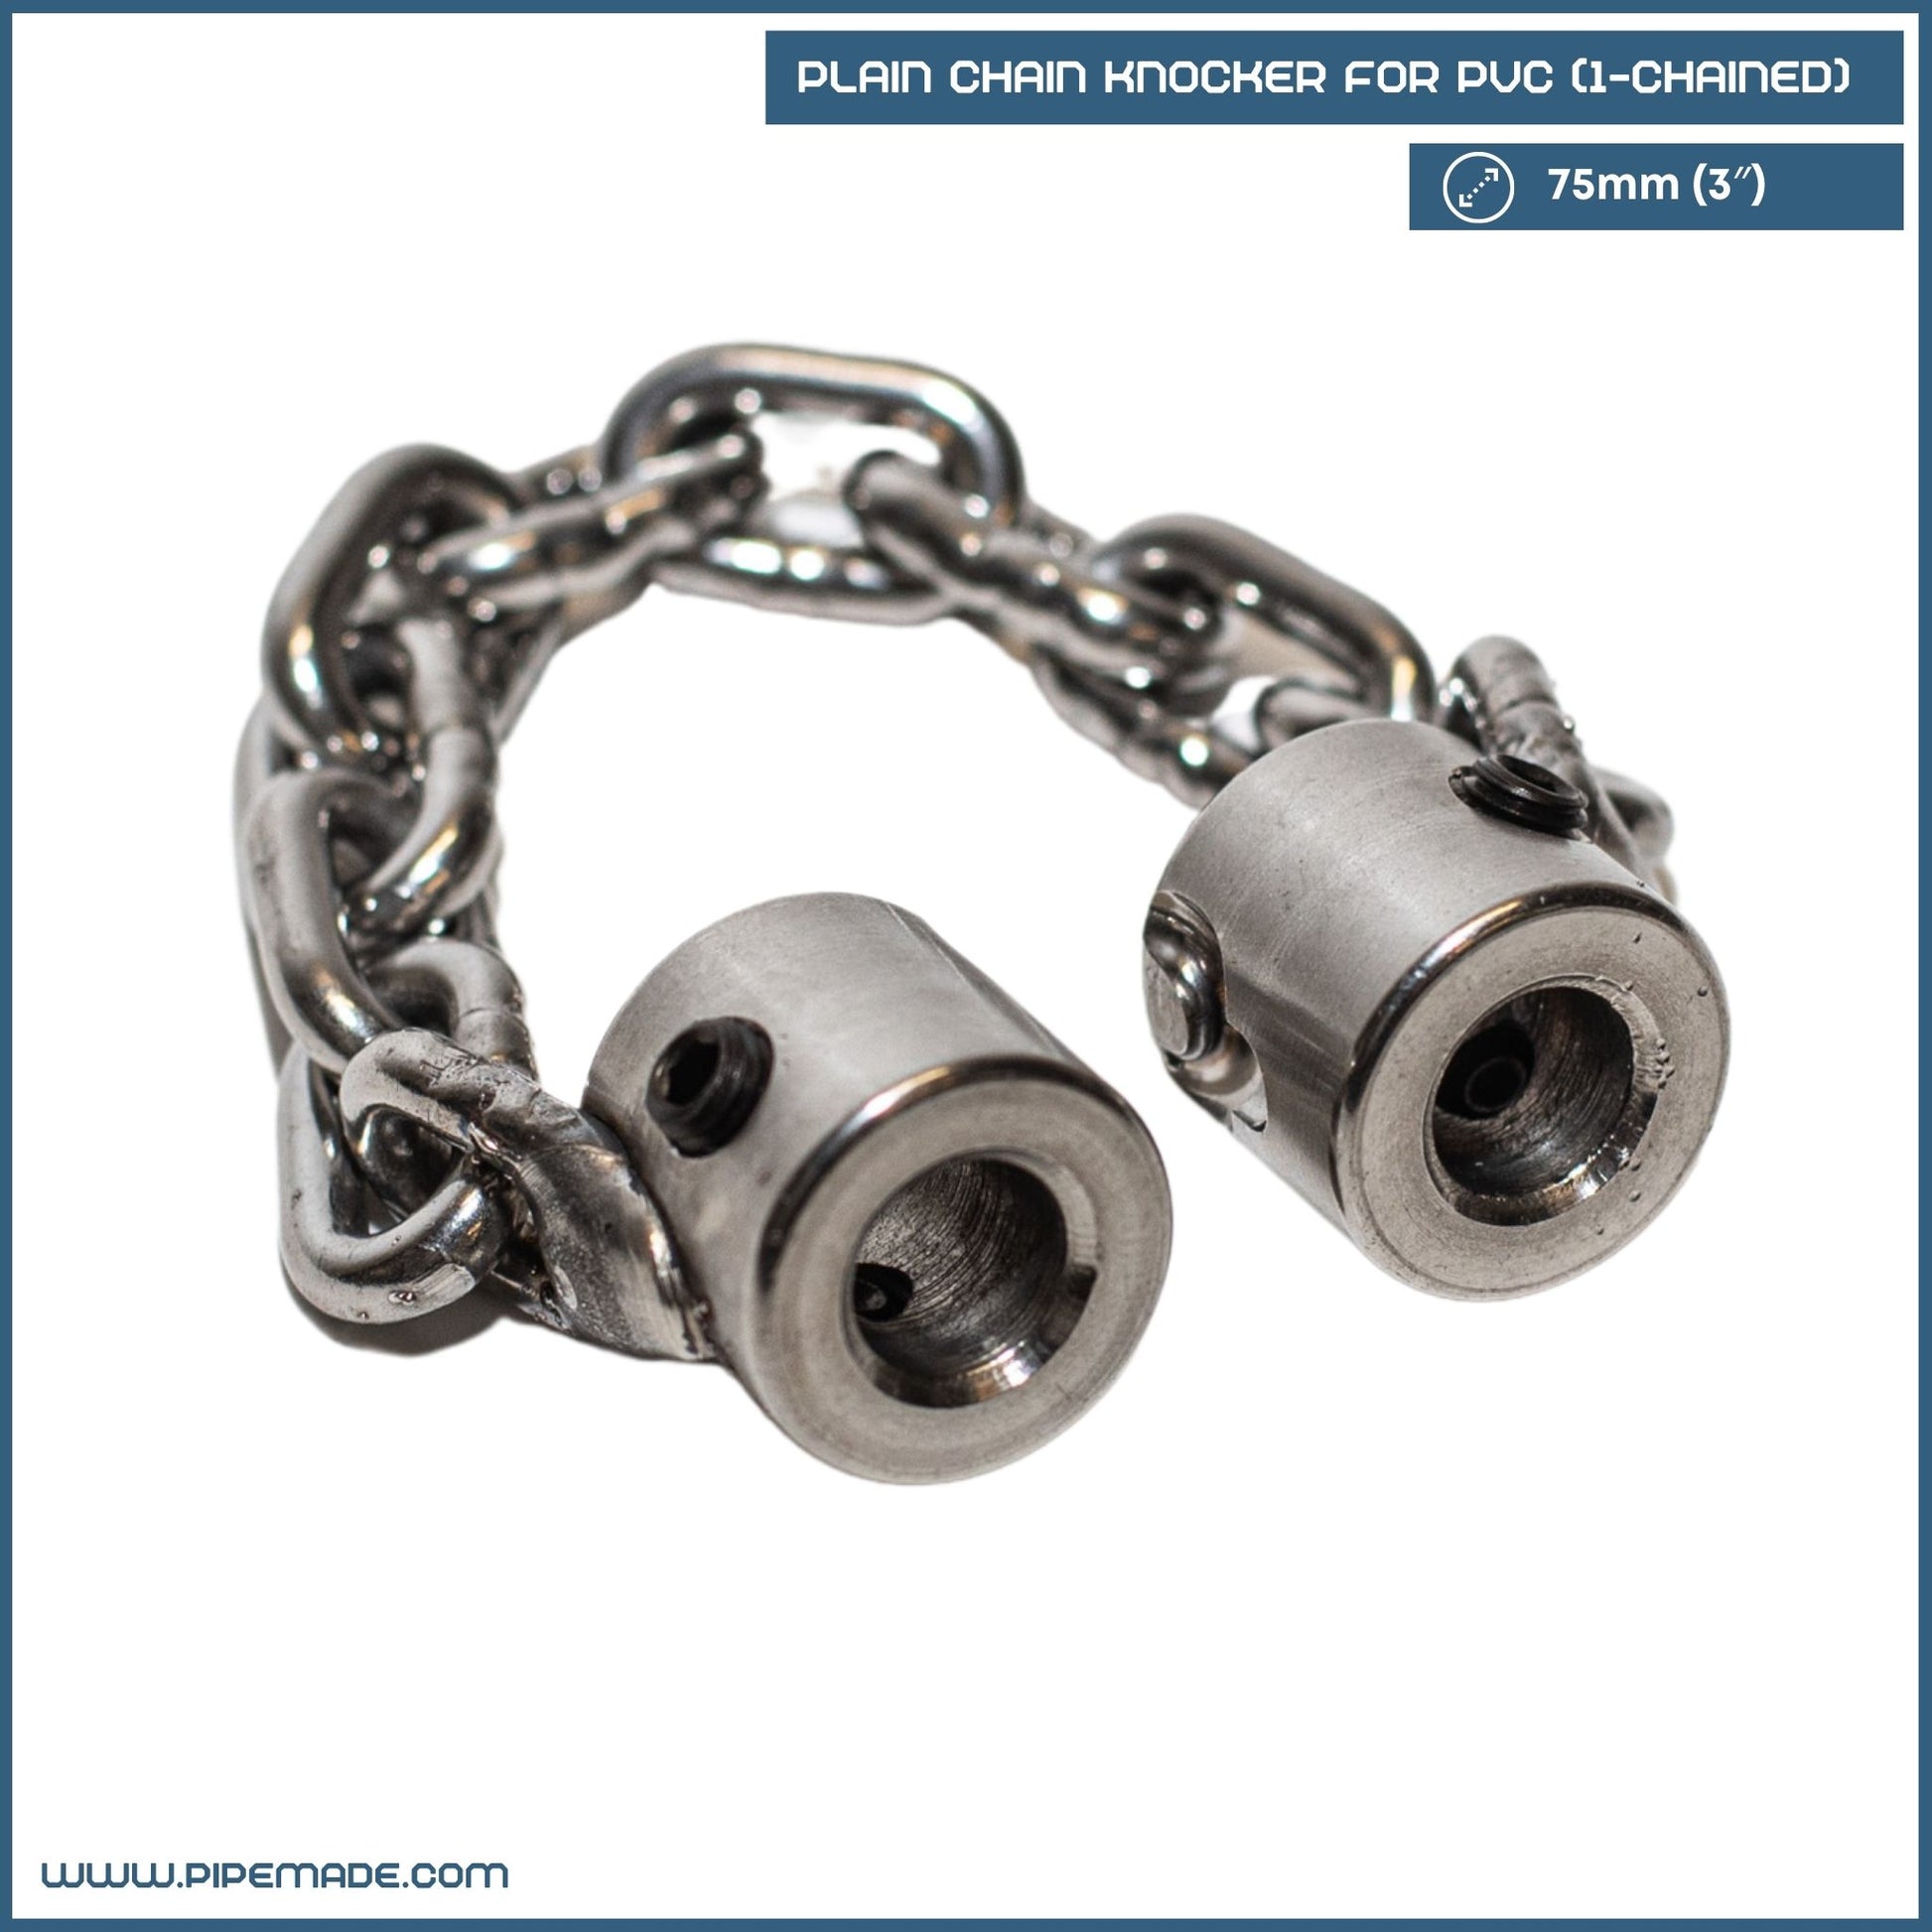 Plain Chain Knocker for PVC (1-Chained) | Zewer | pvc-chain-knocker-1-chained